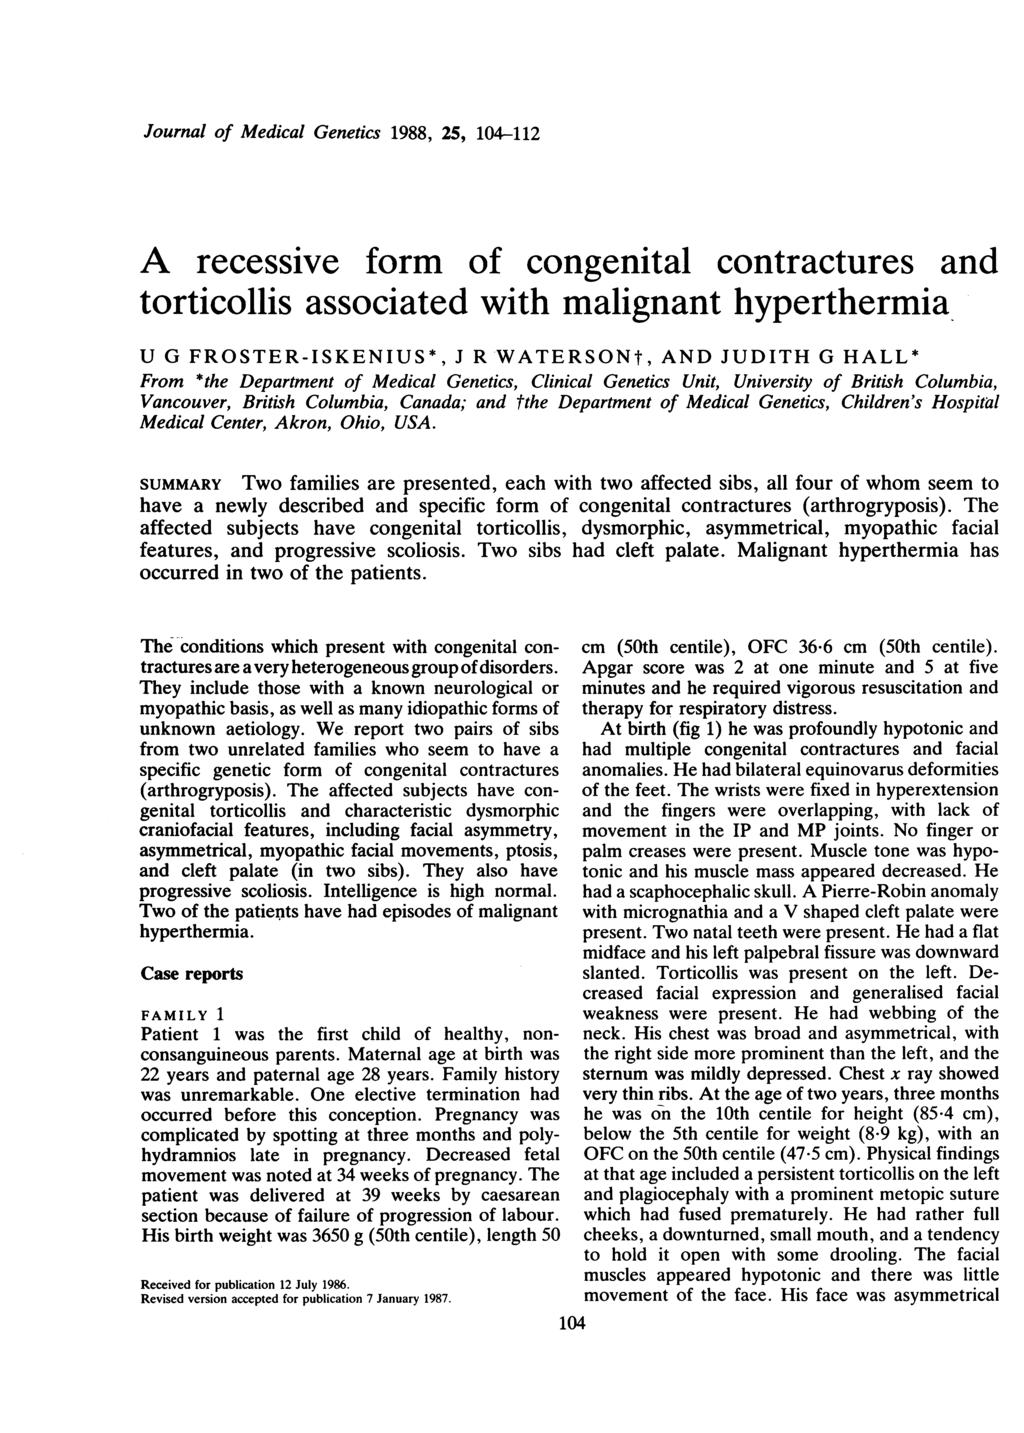 Journal of Medical Genetics 1988, 25, 104-112 A recessive form of congenital contractures and torticollis associated with malignant hyperthermia U G FROSTER-ISKENIUS*, J R WATERSONt, AND JUDITH G